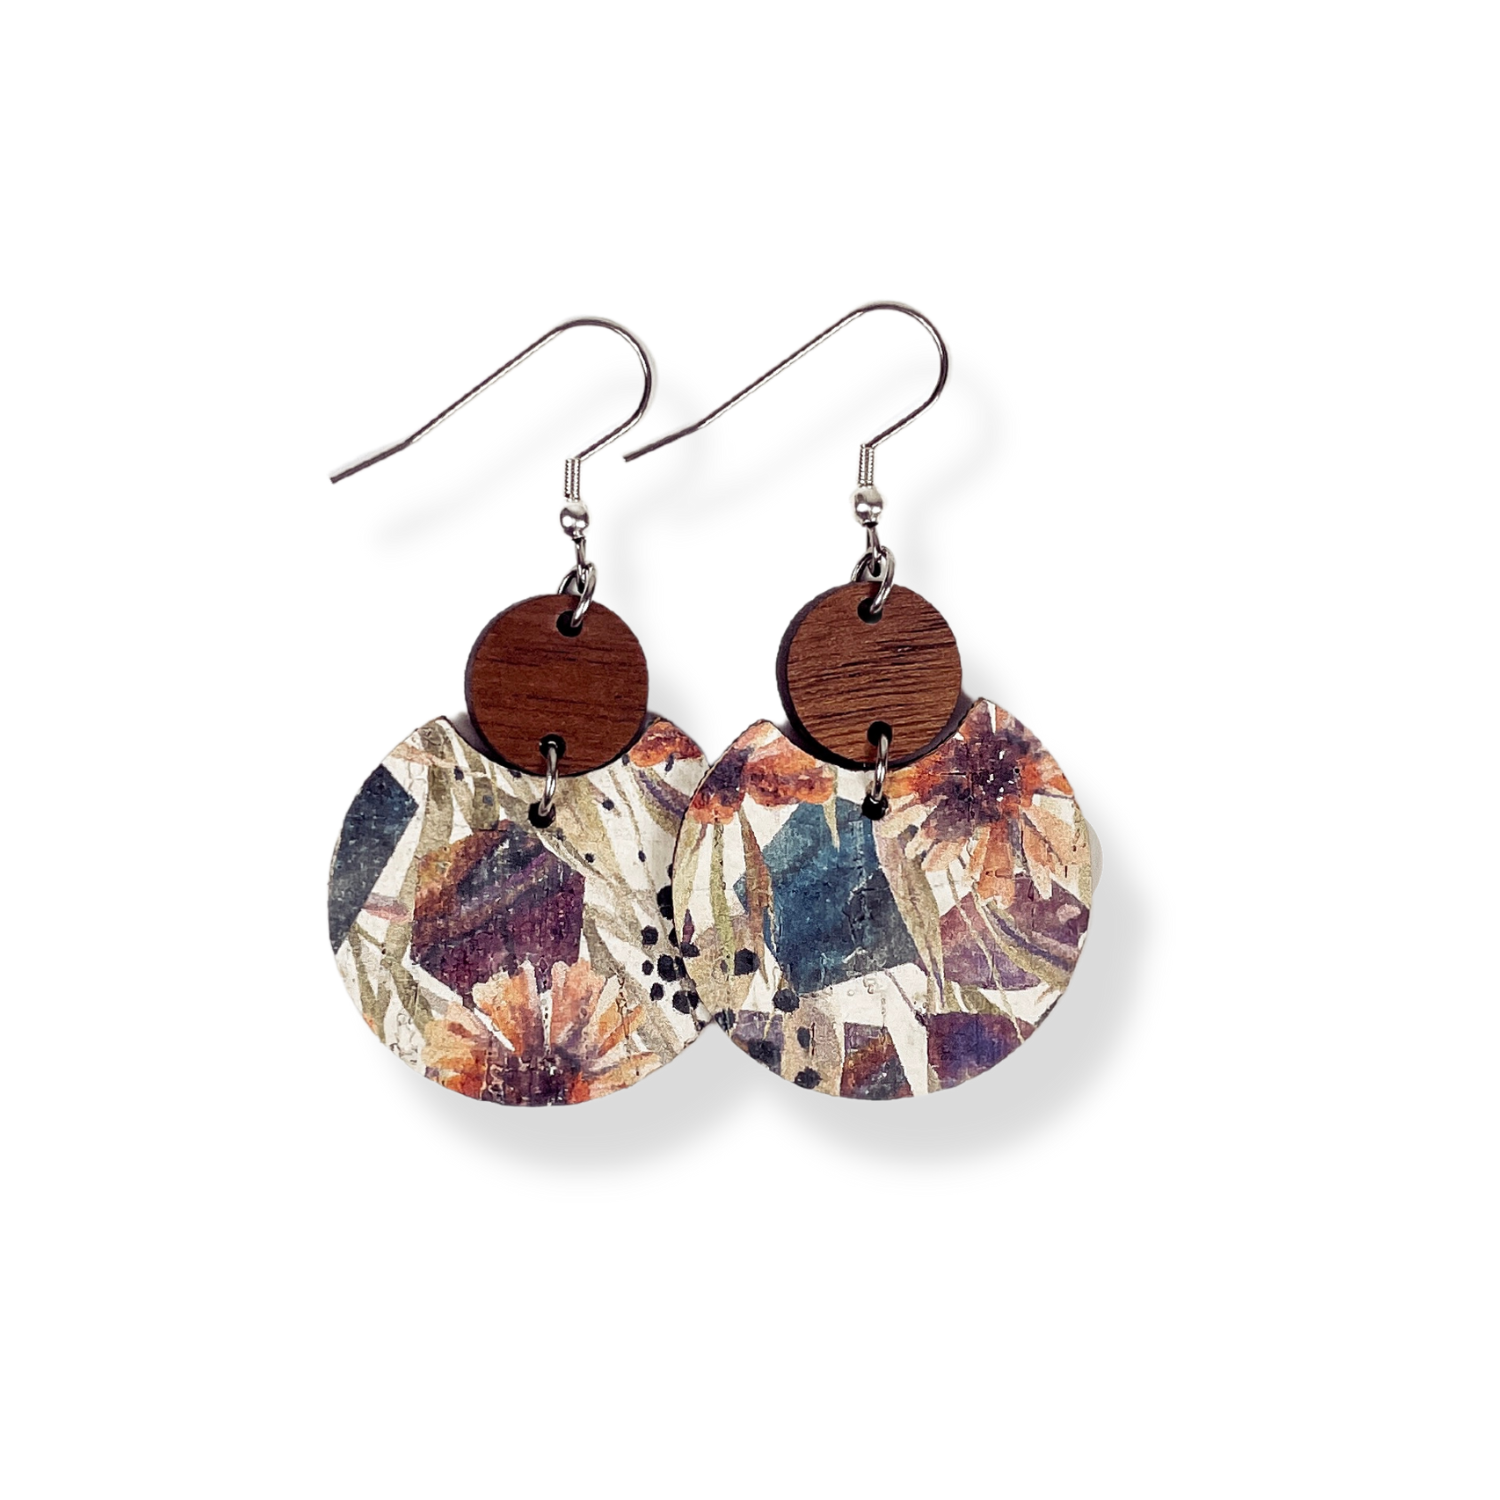 Cora Walnut Wood and Cork Earrings- Autumn Floral at